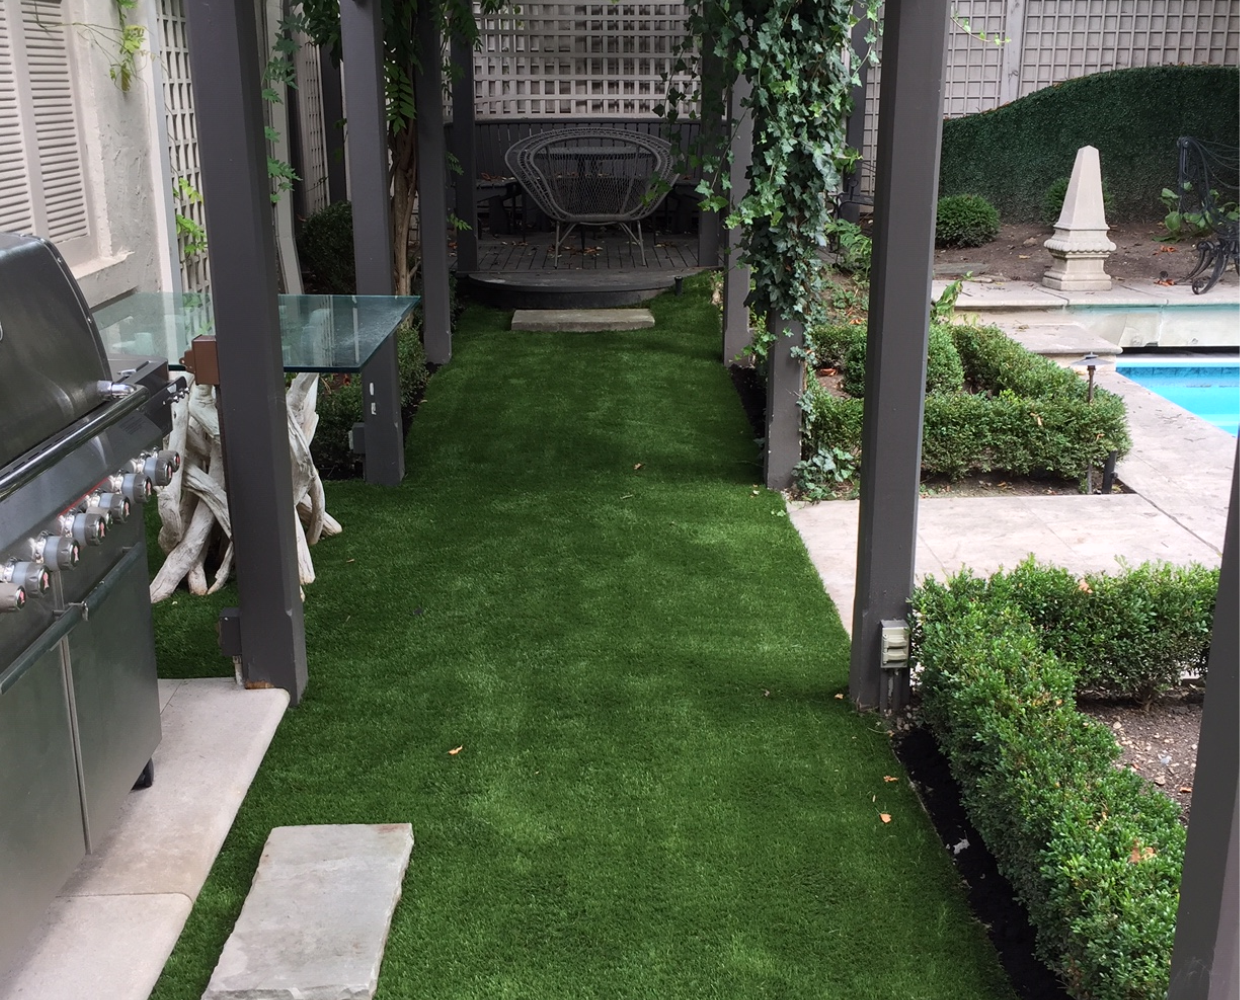 Beautiful pergola shades the artificial grass for total comfort